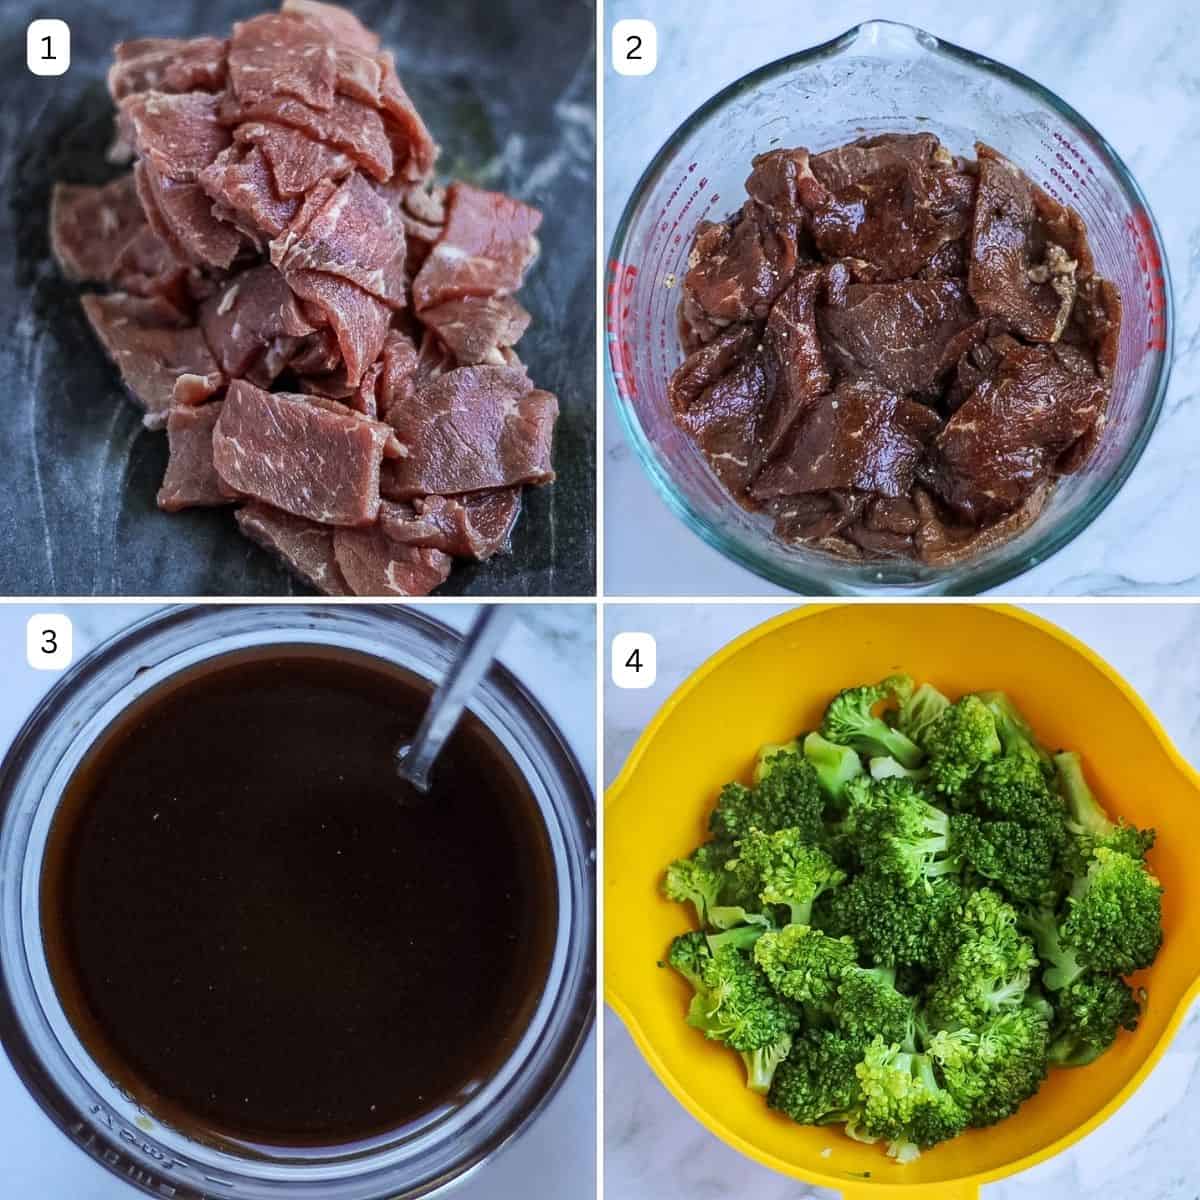 Step by step instructions on how to make beef and broccoli.